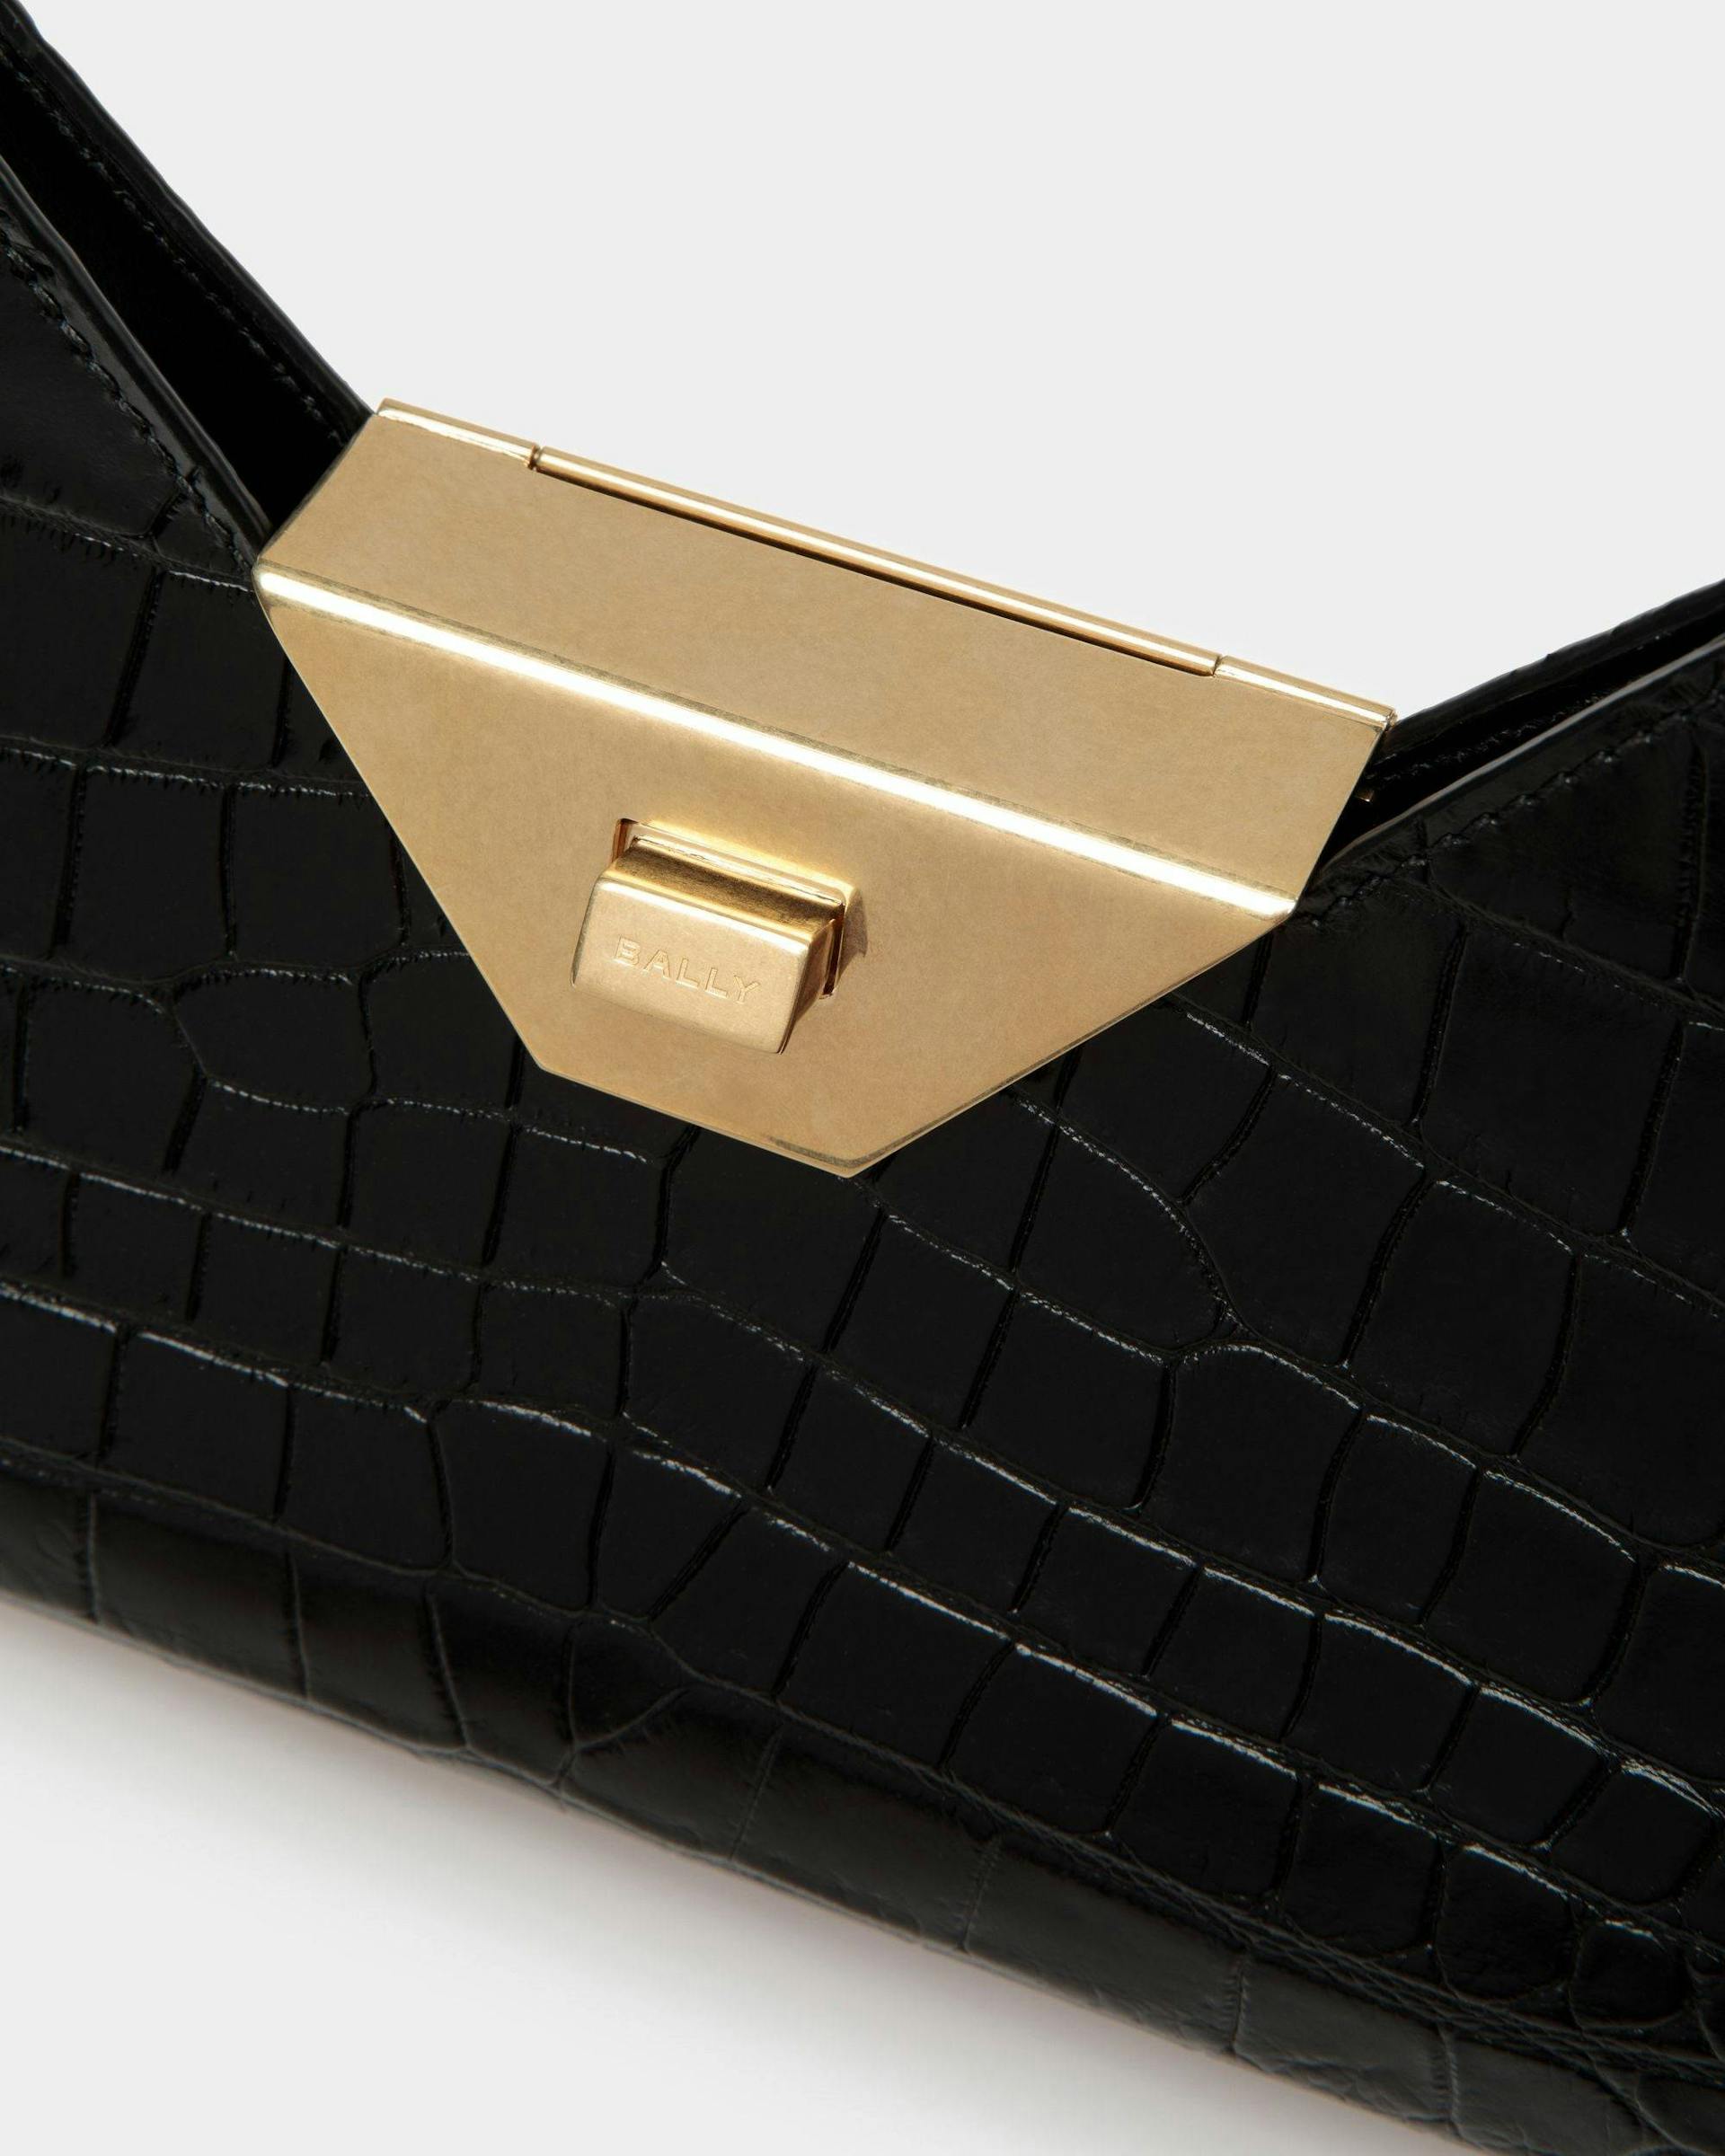 Women's Trilliant Small Shoulder Bag In Black Leather | Bally | Still Life Detail